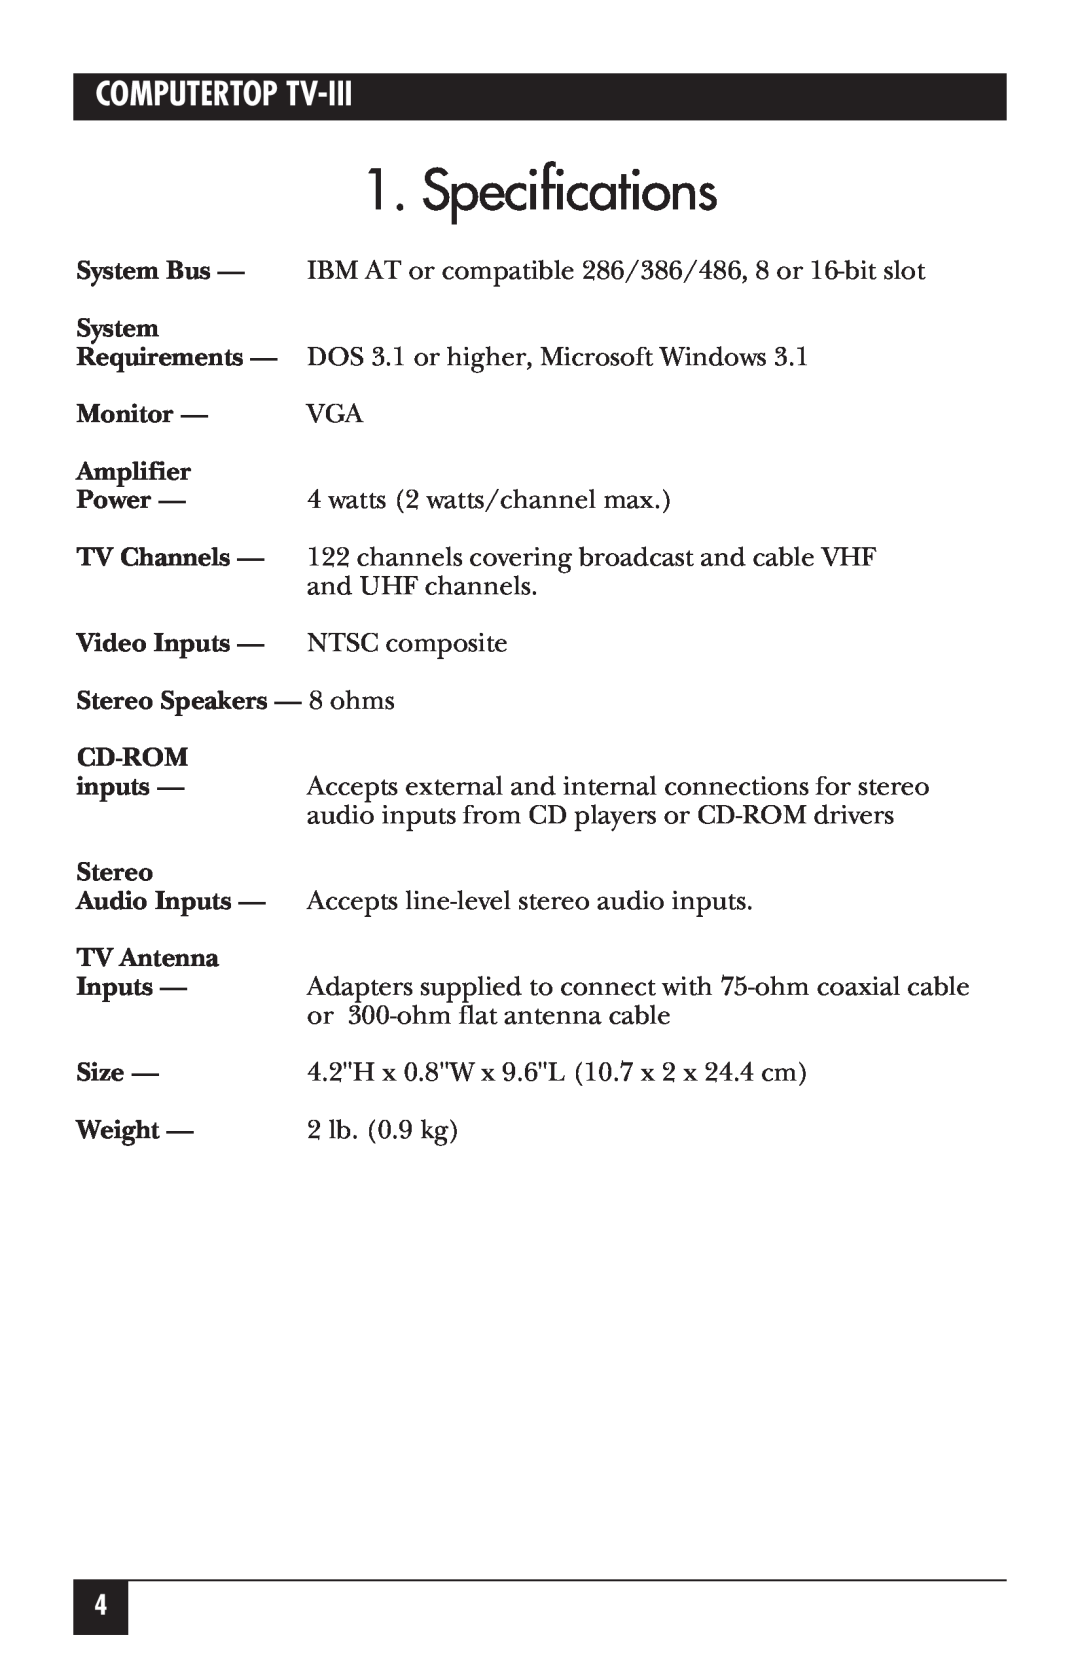 IBM AC453A manual Specifications, System, Monitor, Amplifier, Video Inputs - NTSC composite Stereo Speakers - 8 ohms CD-ROM 